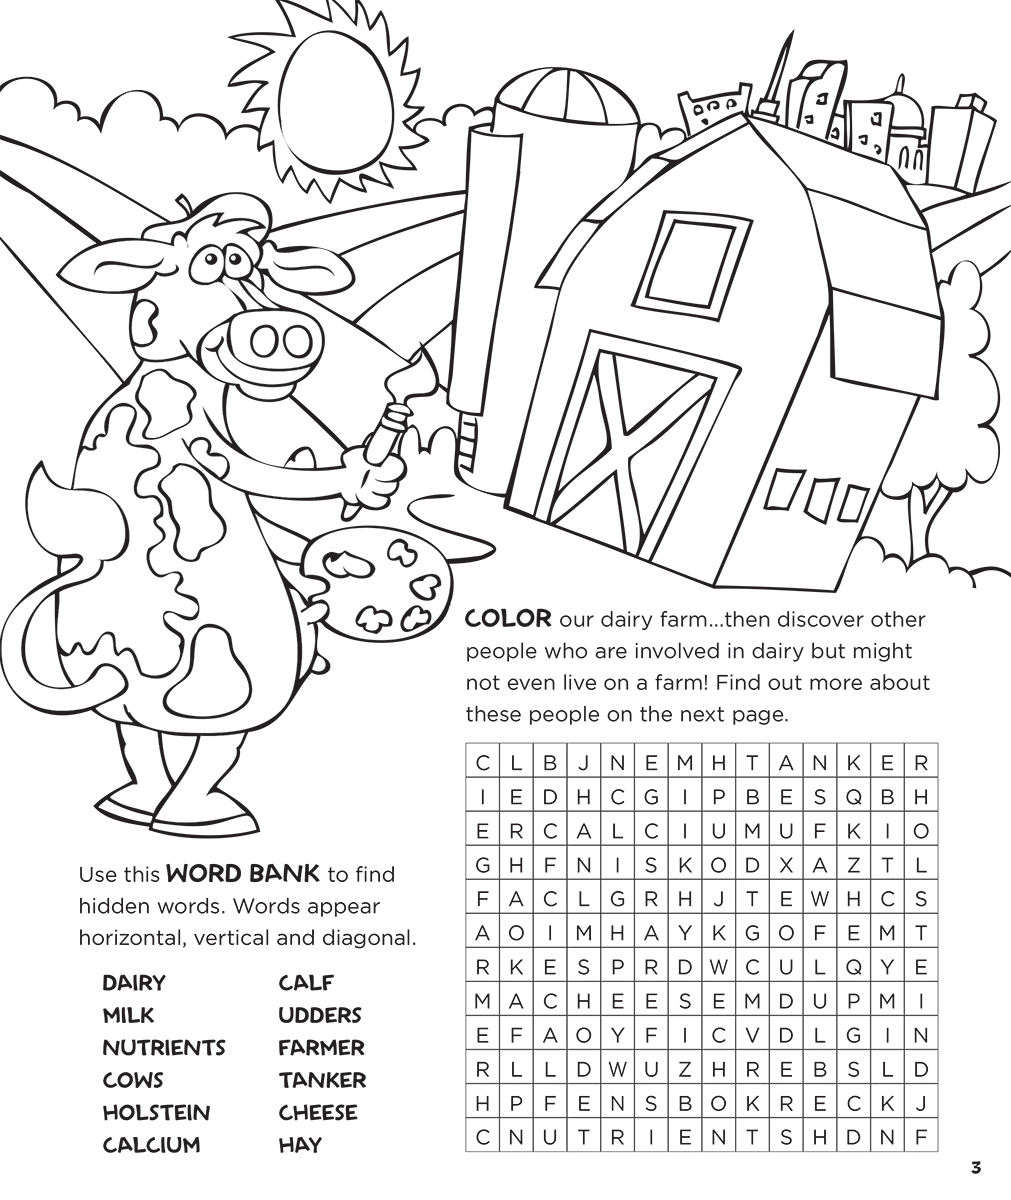 WDA The Story of Dairy Farming Coloring Book - 2nd Interior Page - Word Search